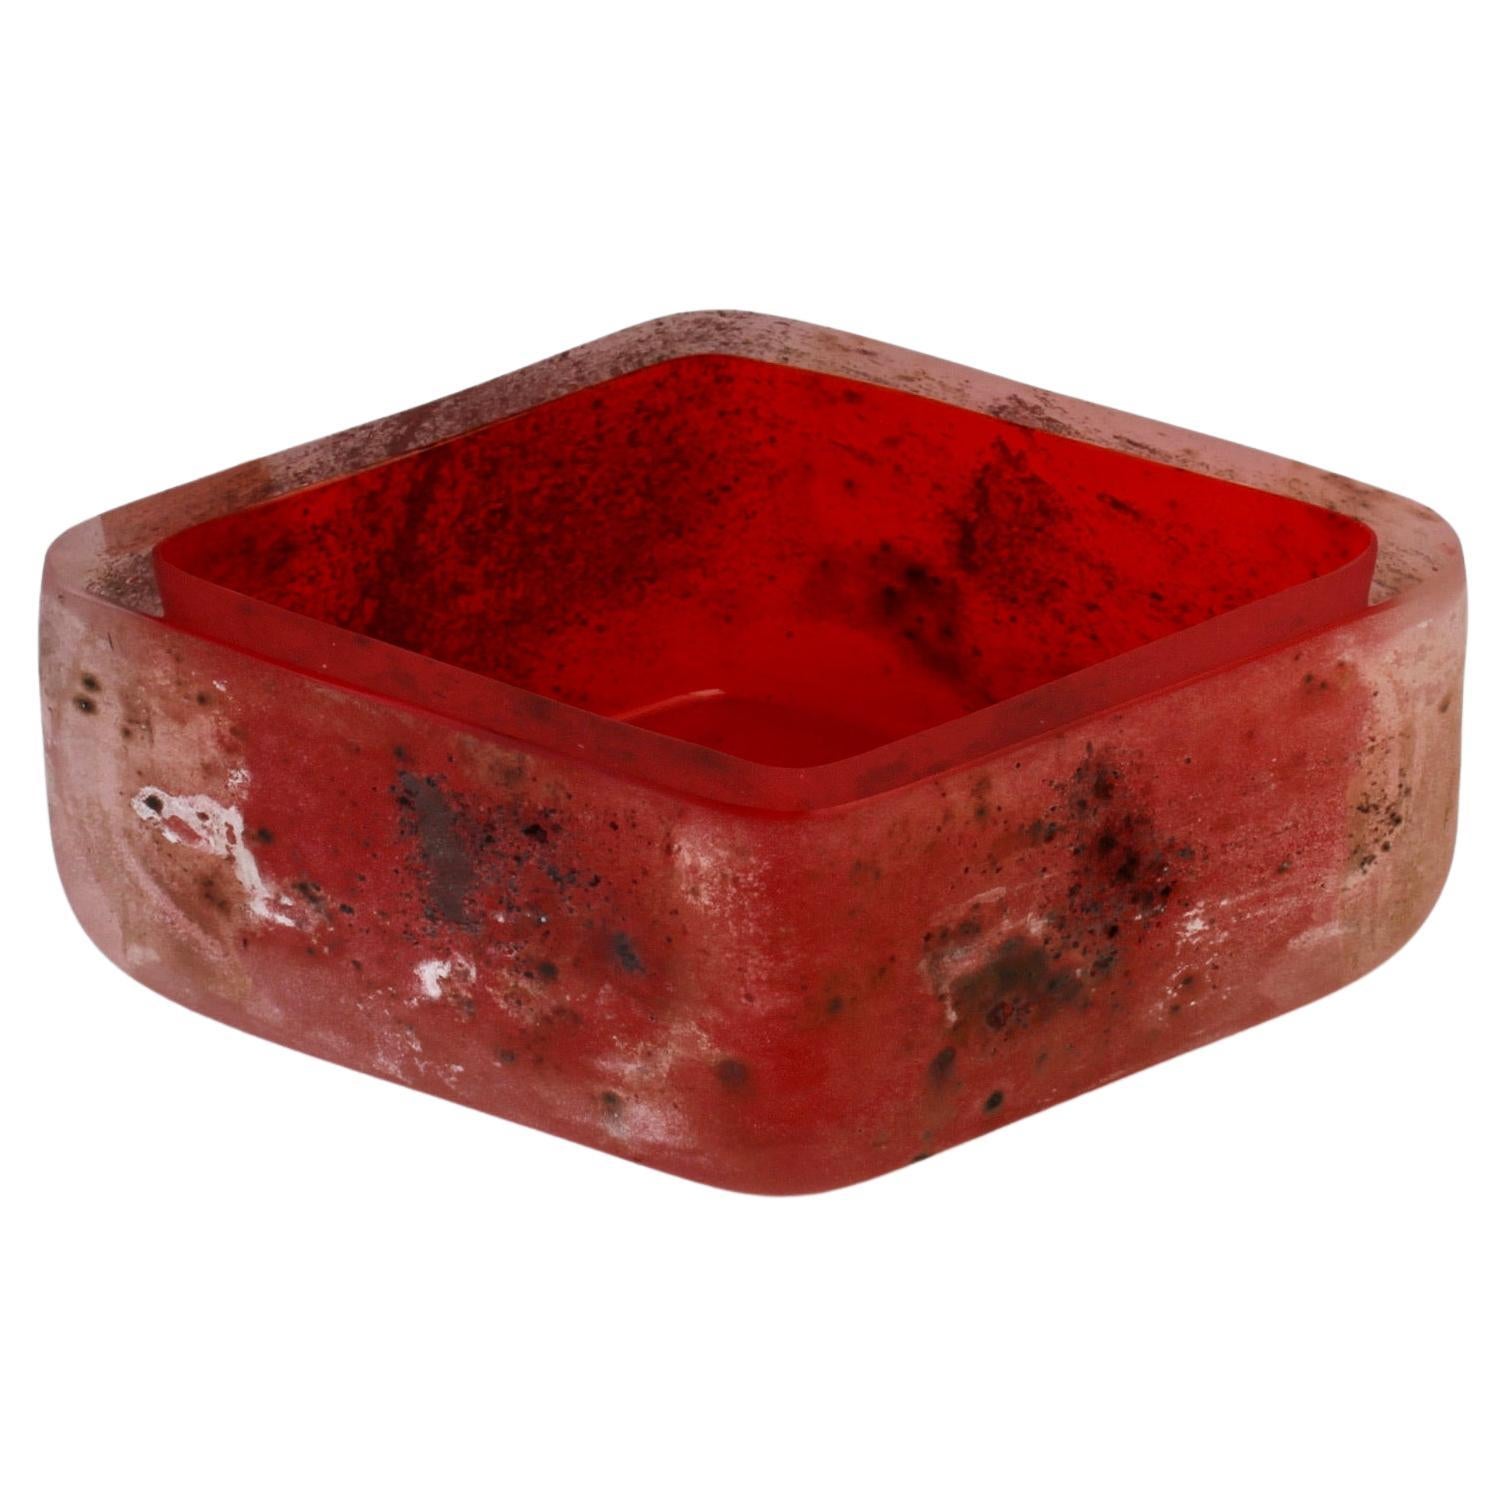 Large and rare signed red and clear 'Scavo' rhombus shaped glass bowl, centrepiece or vide-poche designed by Antonio Da Ros (1936-2012) for Cenedese Vetri Murano glass circa 1980s. Made of red and clear Murano art glass using both the sommerso &